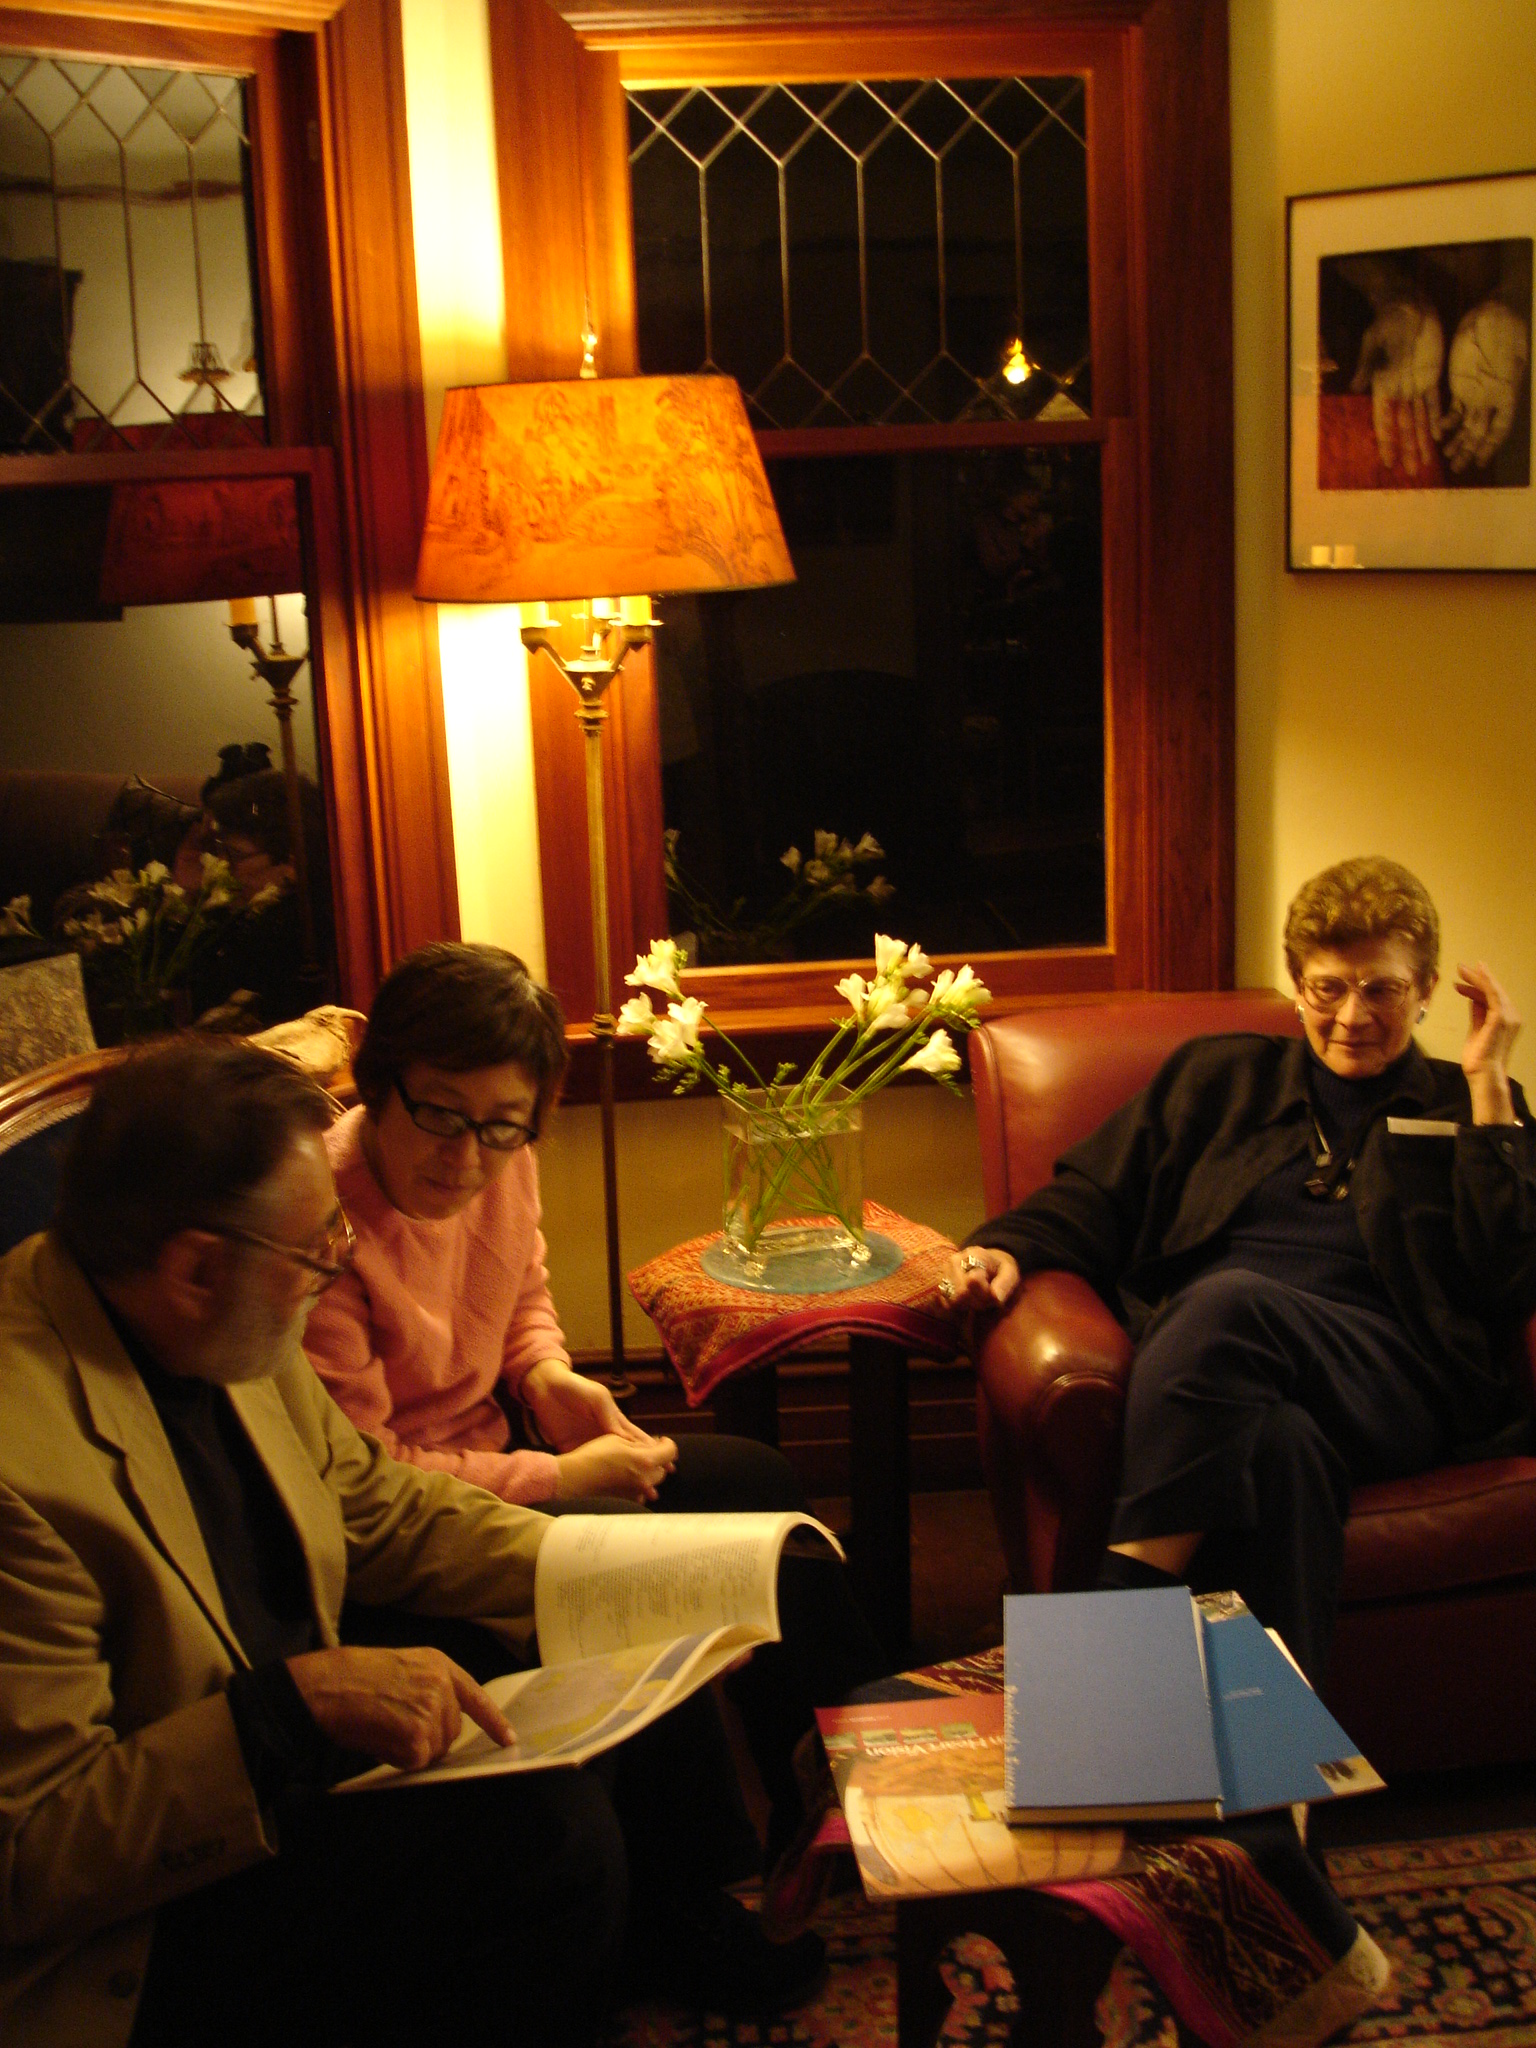 A picture of three people sitting in a living room